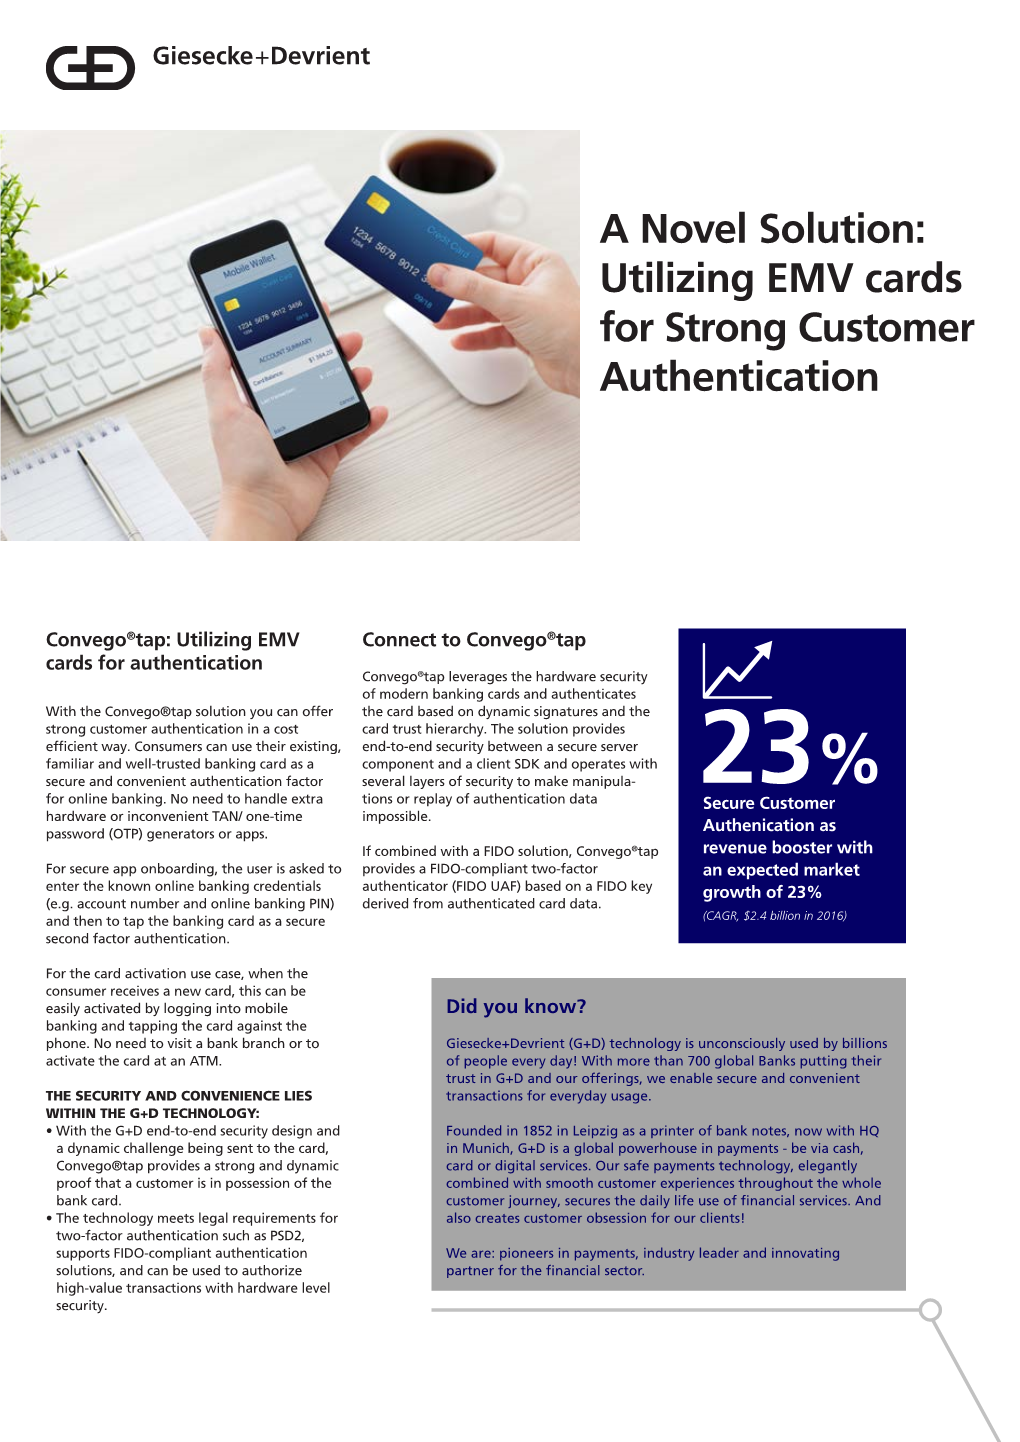 Utilizing EMV Cards for Strong Customer Authentication